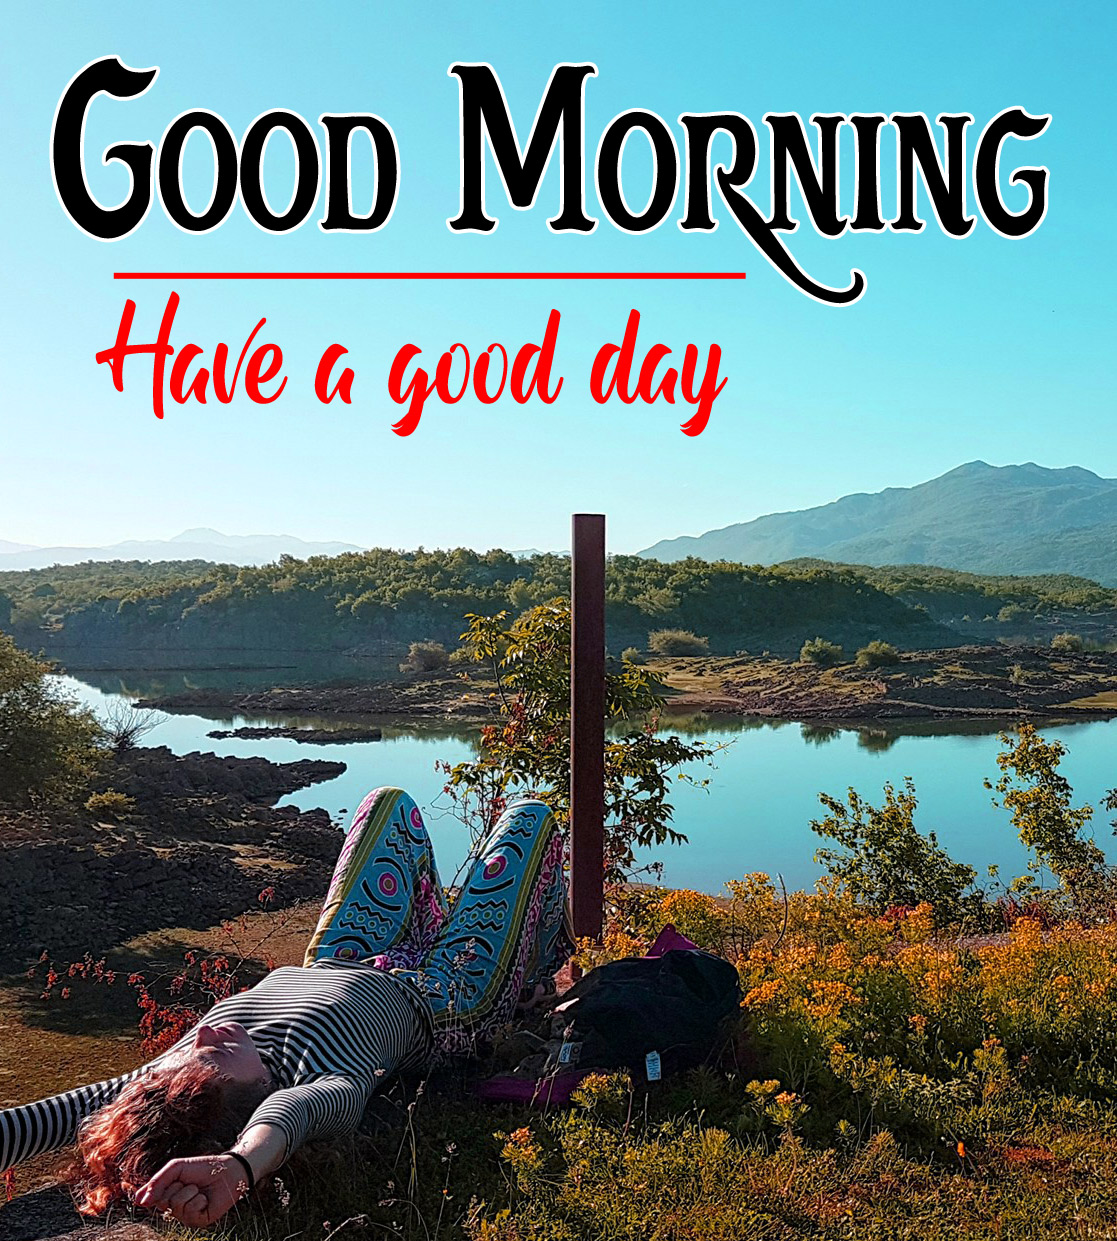 Free Good Morning Images Photo Download 